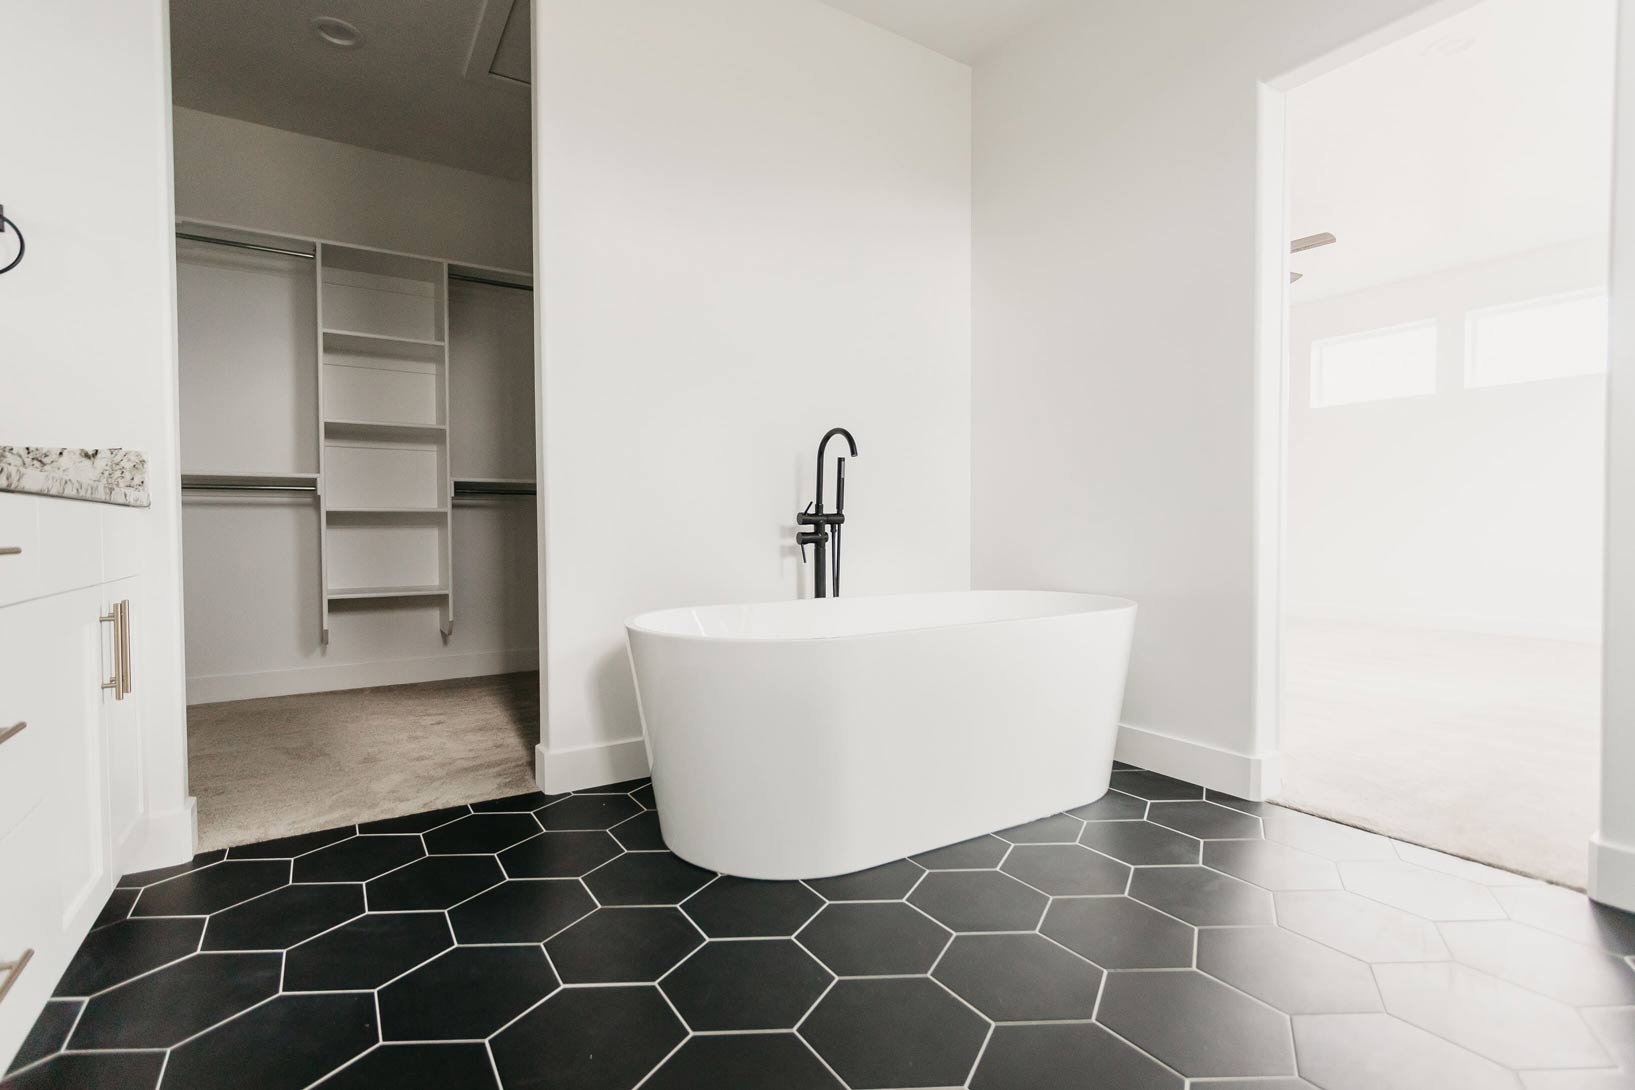 free standing tub with black & white tile by 10x builders in utah county